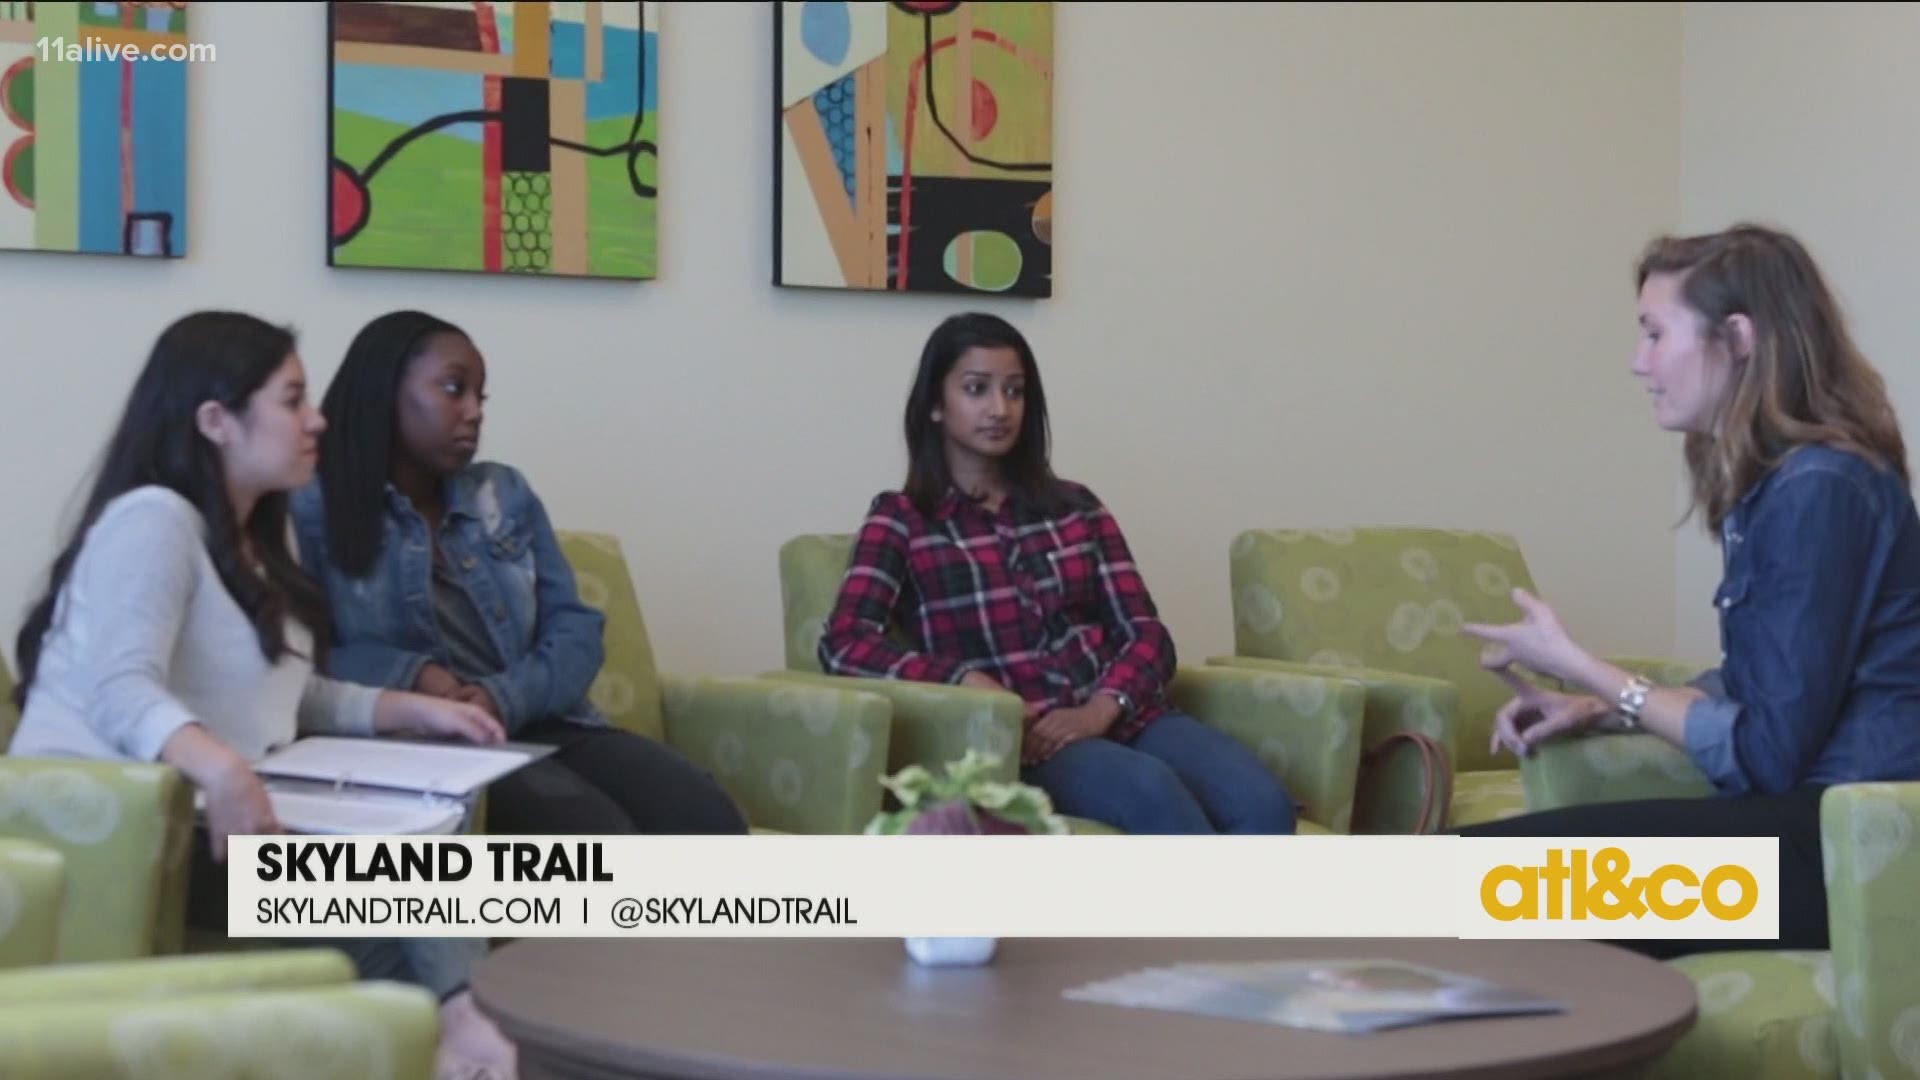 Skyland Trail is a nonprofit mental health treatment organization in Atlanta offering residential and day treatment programs for adults and adolescents.